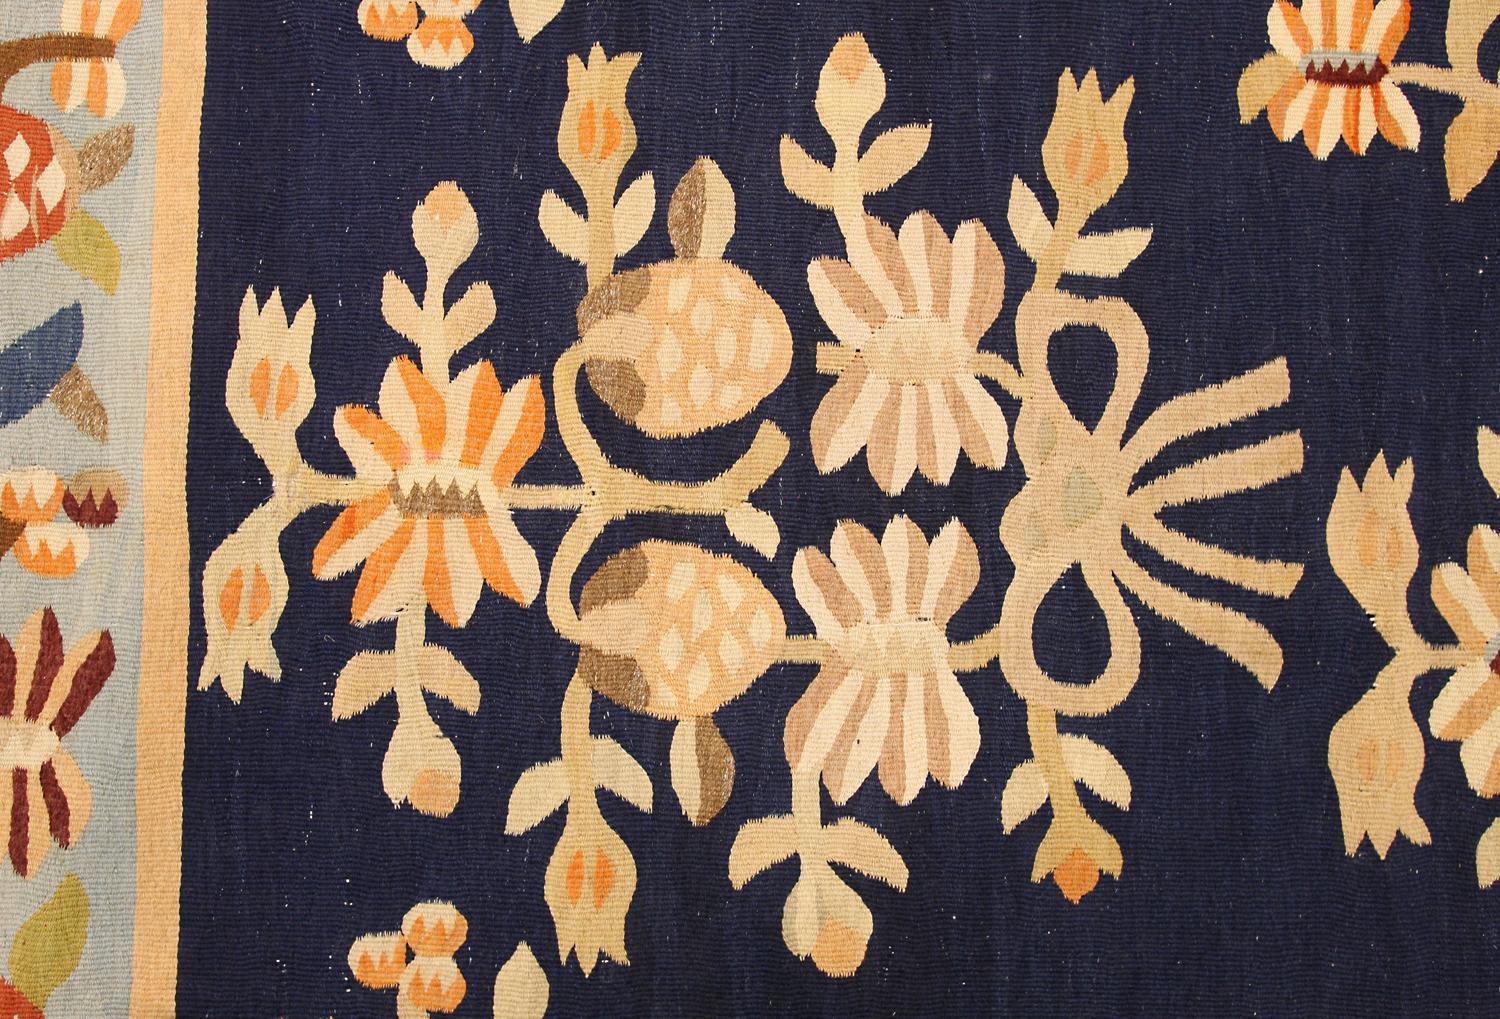 Hand-Knotted Floral All-Over Navy Field Antique Ukrainian Bessarabian Wool Kilim, ca. 1920